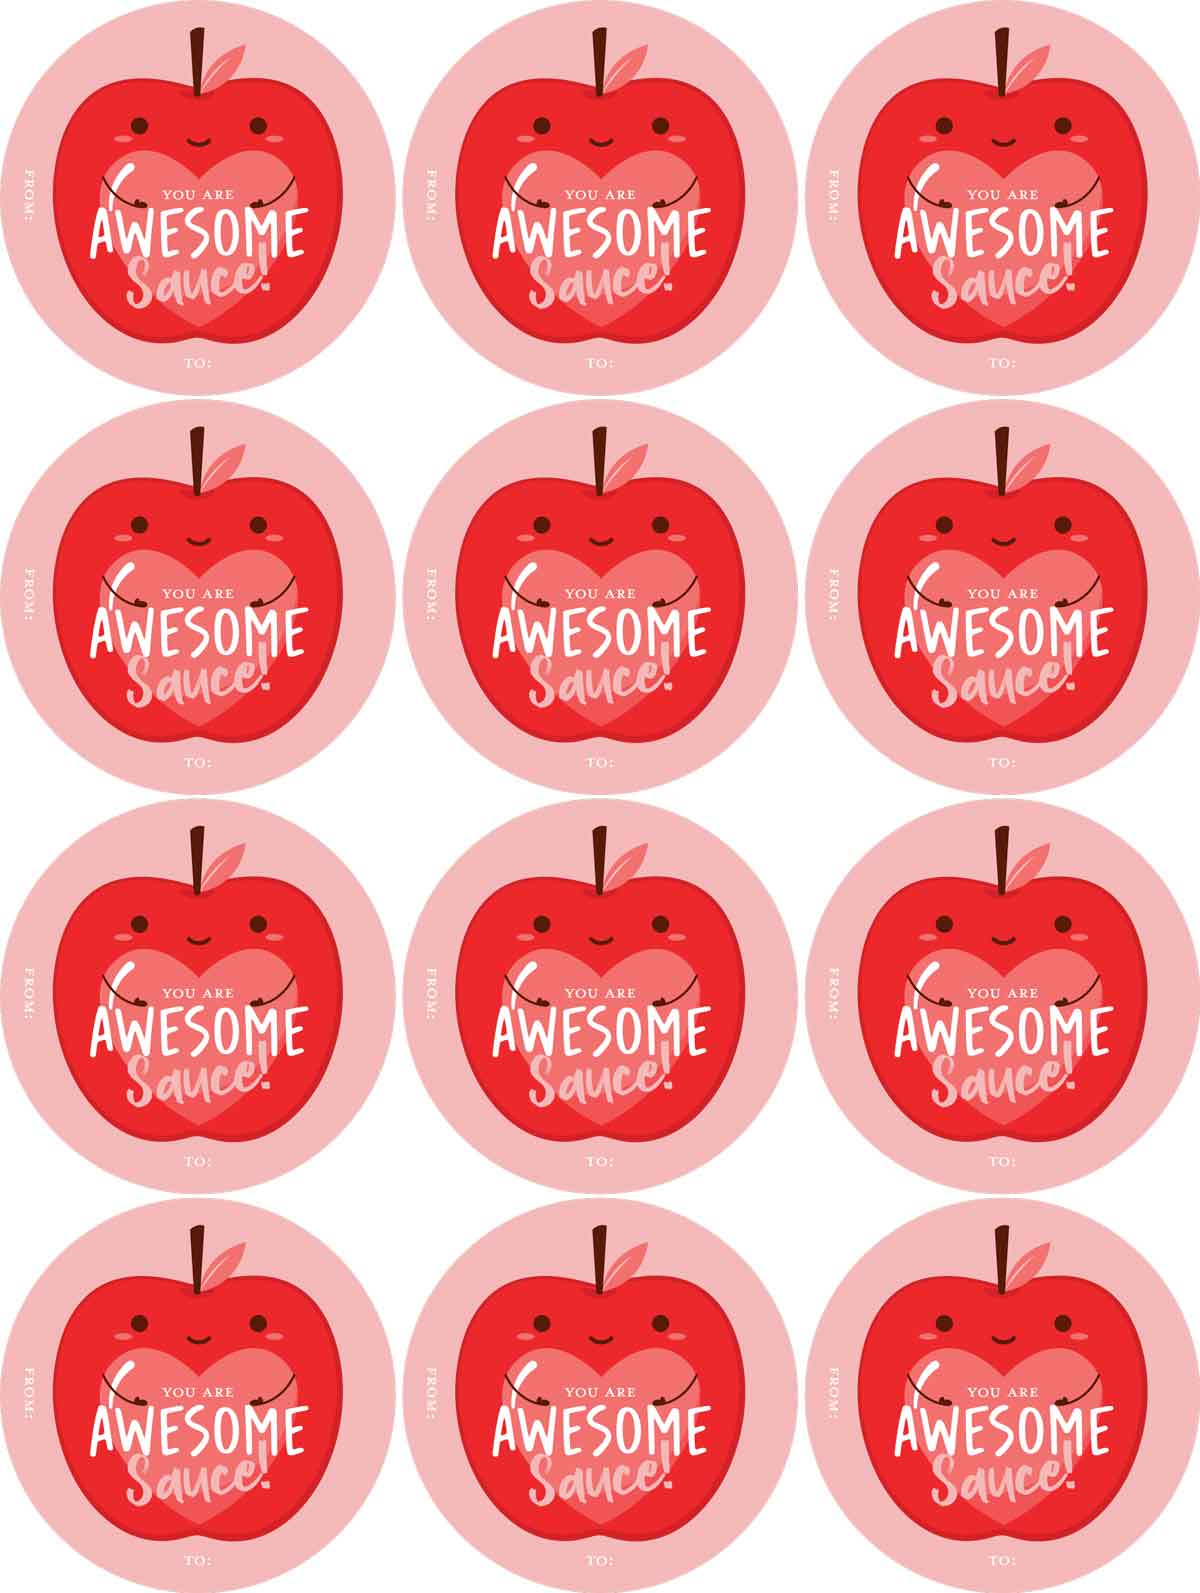 free awesomesauce valentine printable